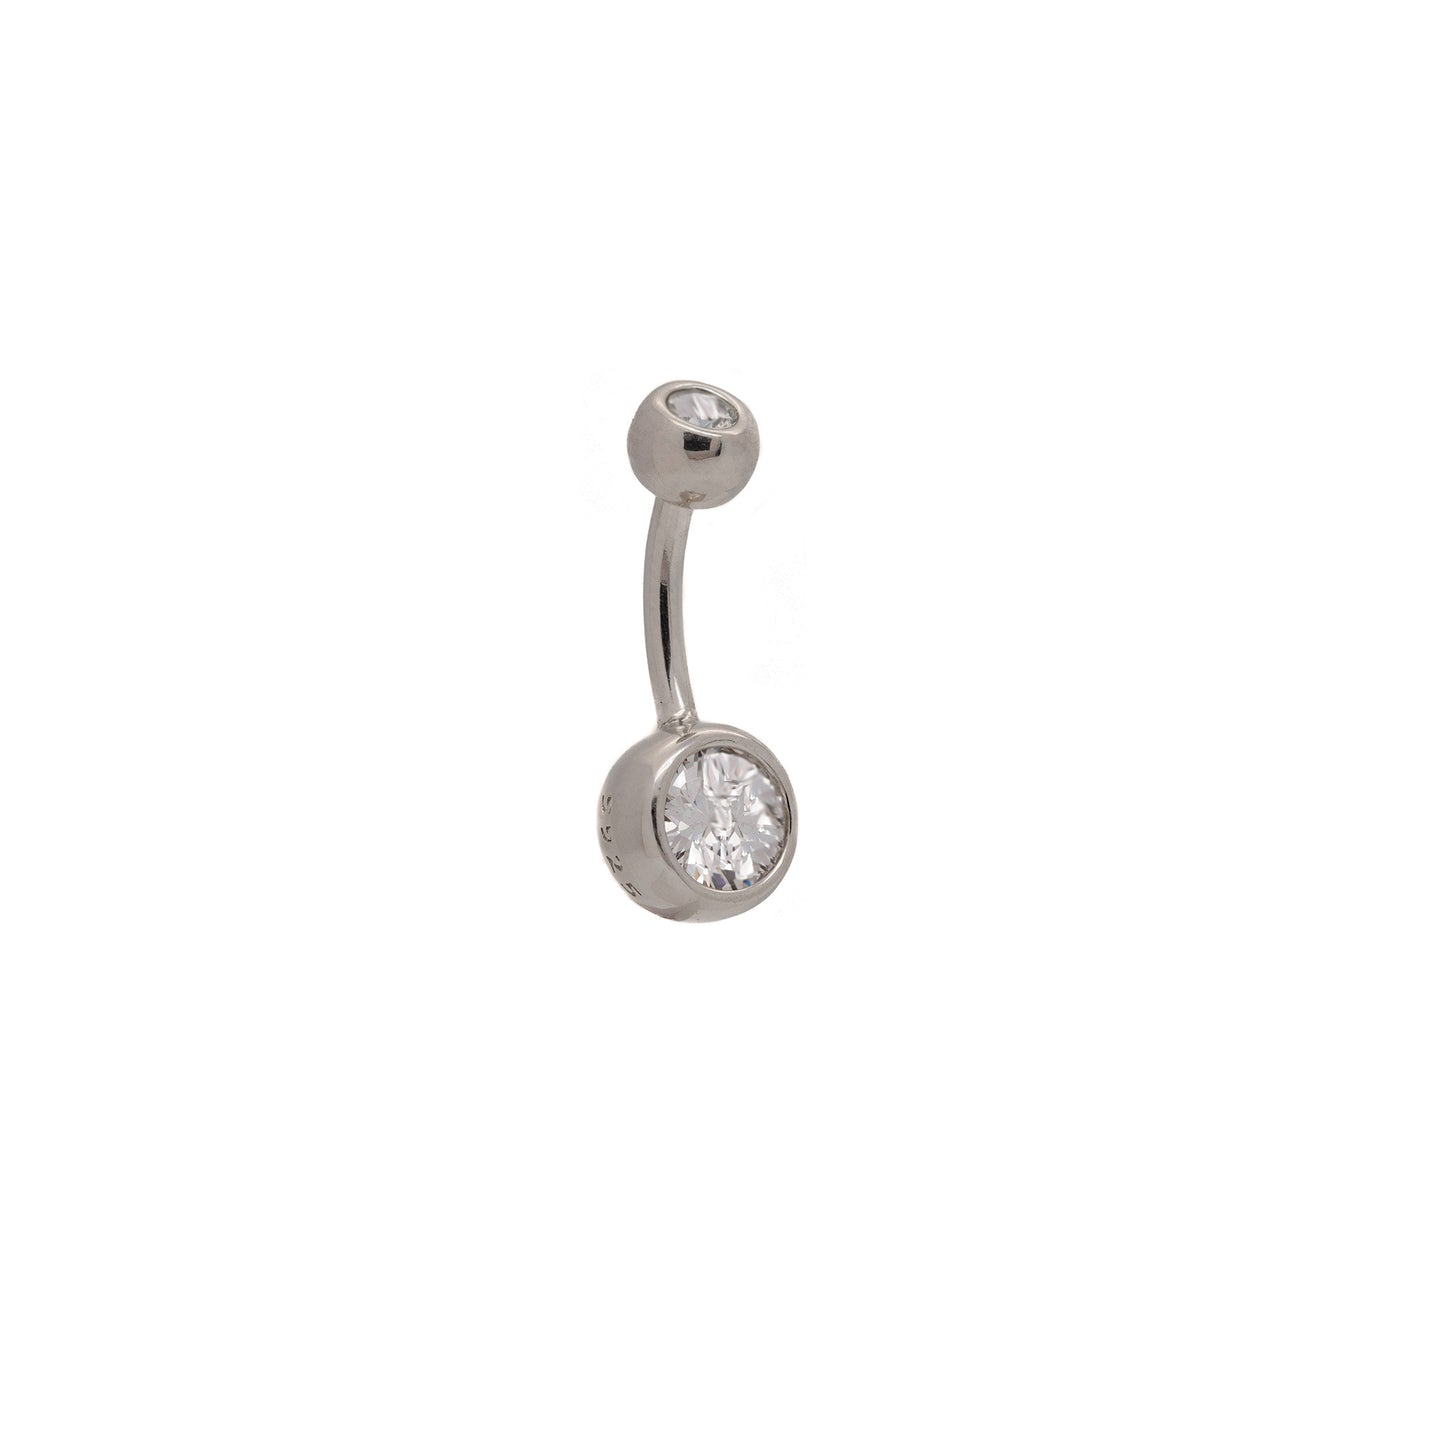 Solid 925 Silver | 16G/14G Double Jeweled Belly Ring | 6mm 1/4" 8mm 5/16" 10mm 3/8" - Sturdy South